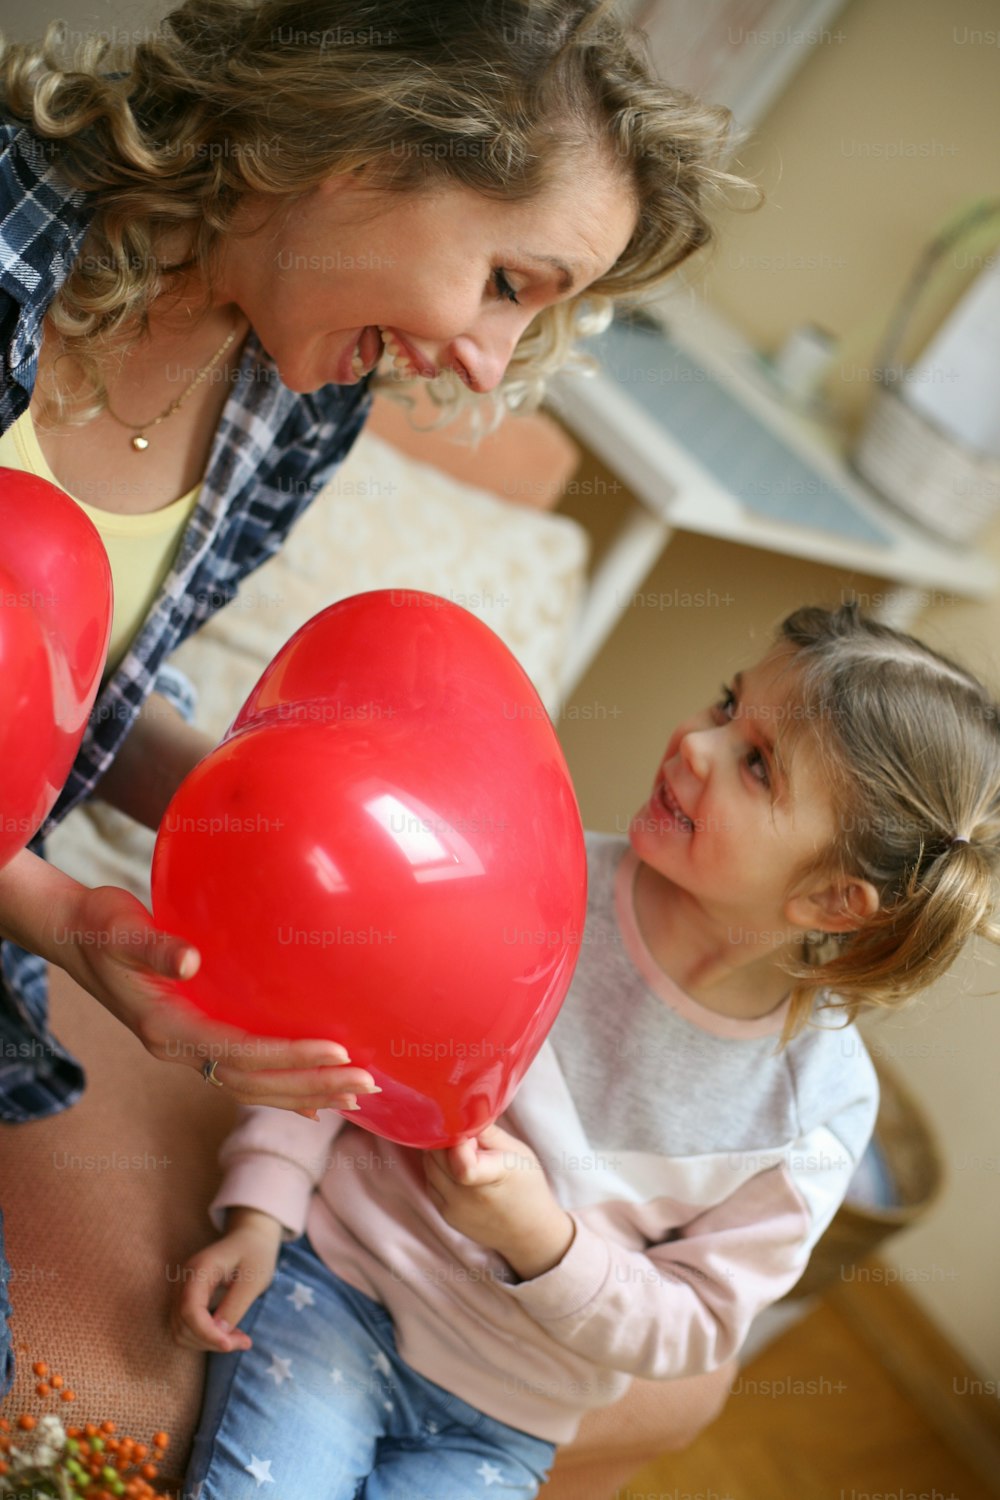 Daughter giving a red balloon to her mother.